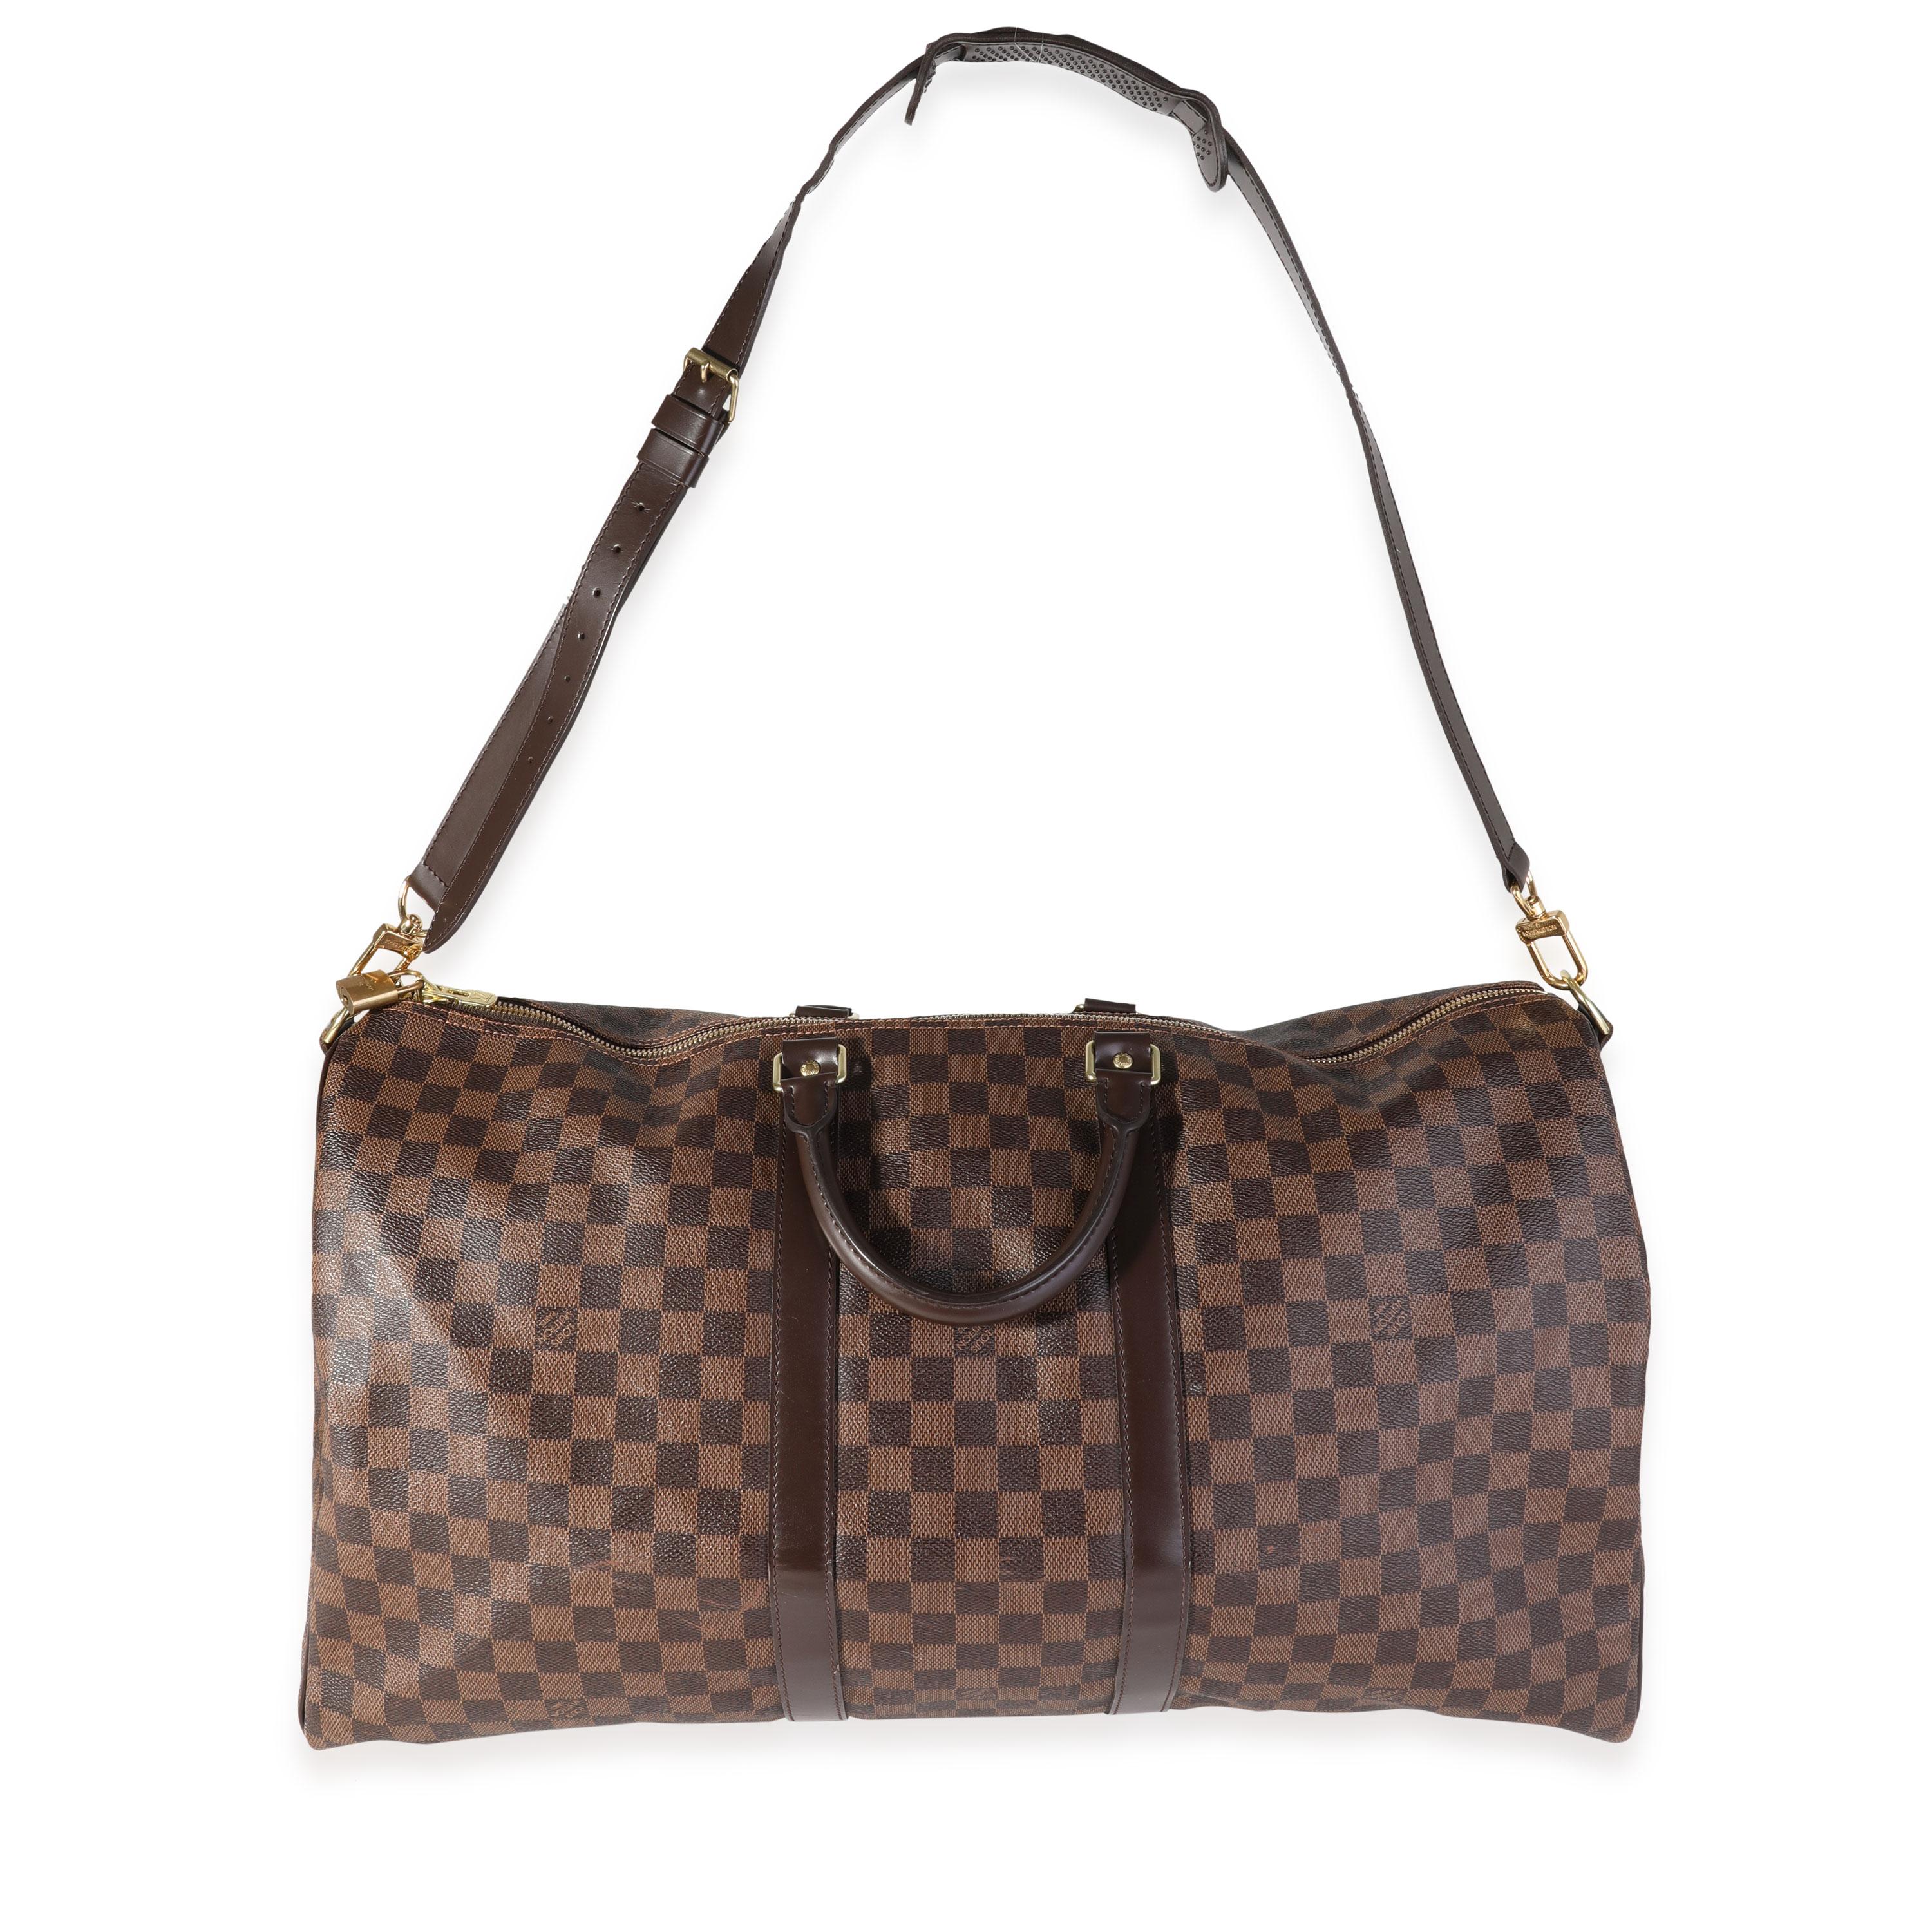 Listing Title: Louis Vuitton Damier Ebene Keepall Bandoulière 55
SKU: 119407
MSRP: 2570.00
Condition: Pre-owned (3000)
Handbag Condition: Very Good
Condition Comments: Scuffing to corners. Wear to interior. Missing key.
Brand: Louis Vuitton
Model: